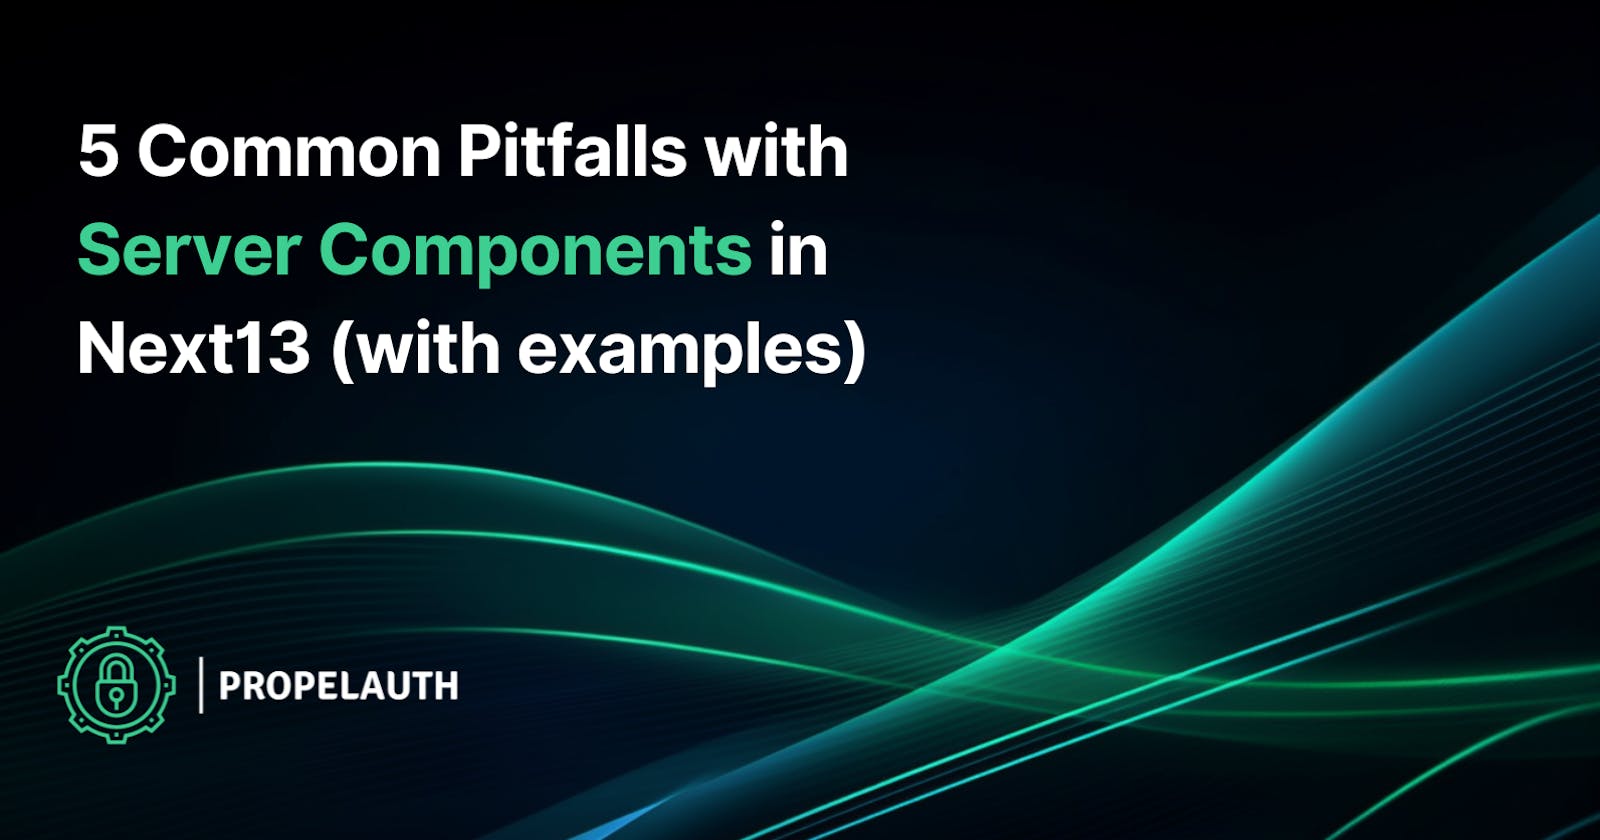 5 Common Pitfalls with Server Components in Next13 (with examples)